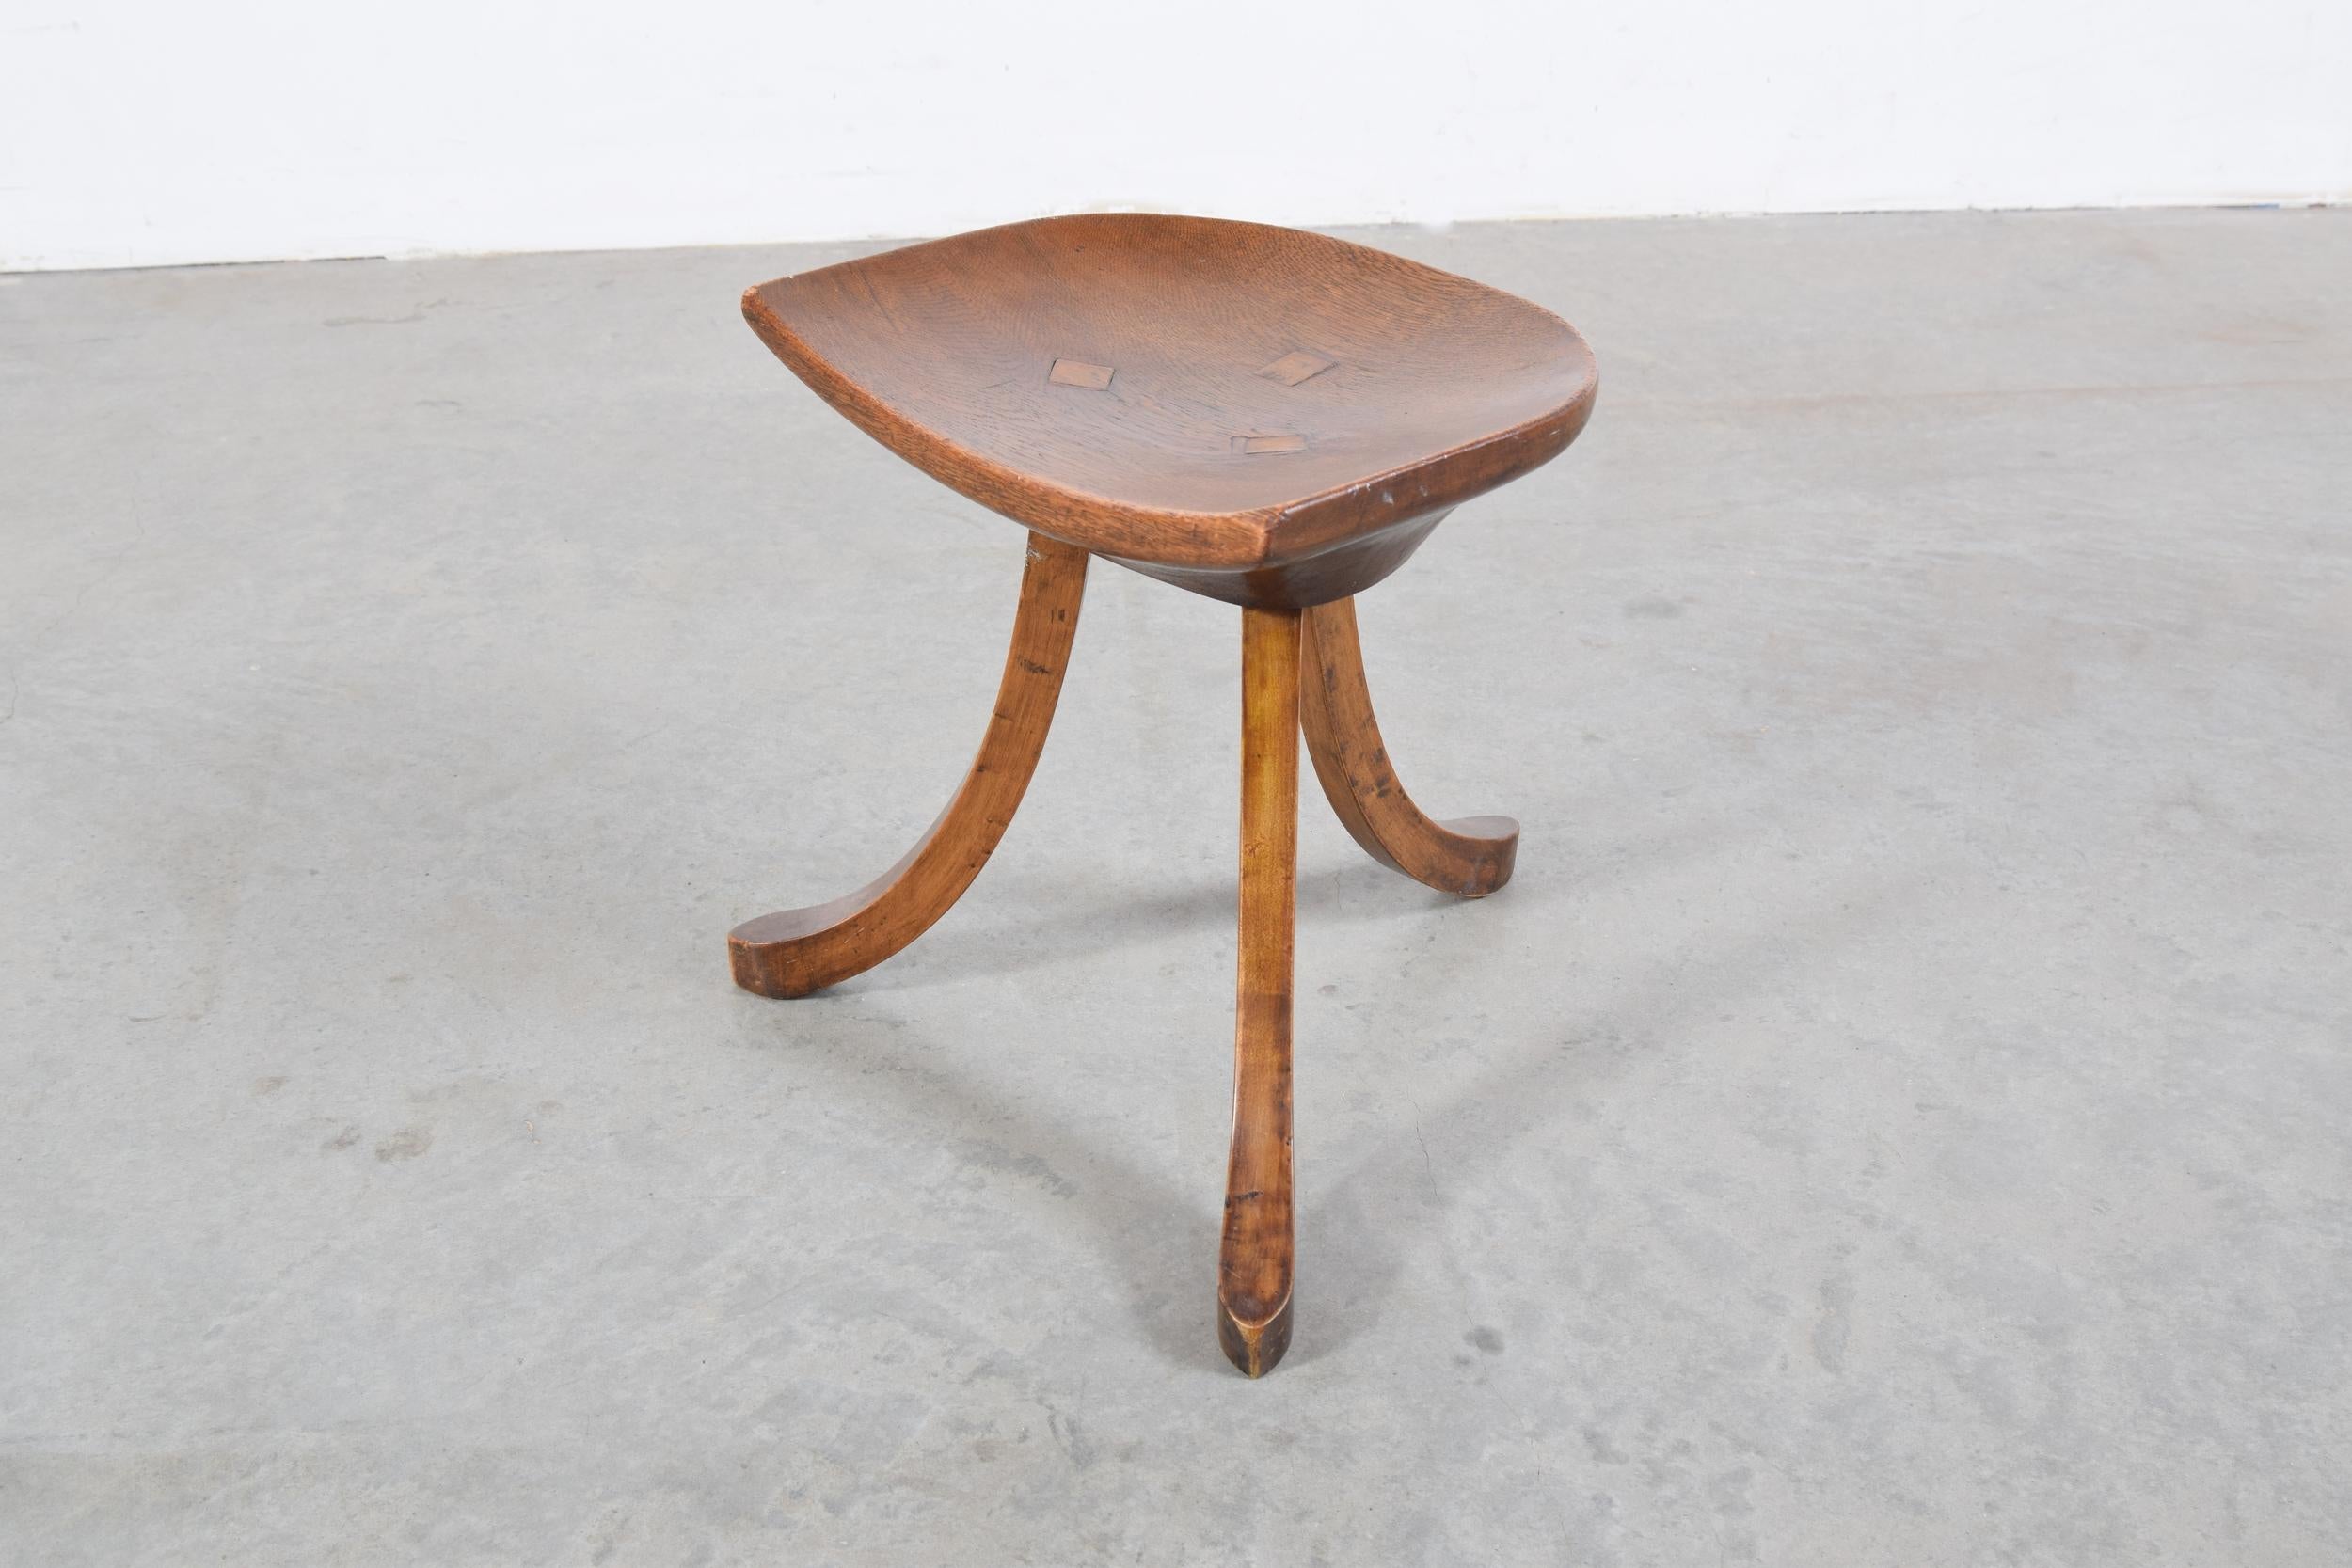 Egyptian Revival Theban Stool by Adolf Loos, circa 1903 For Sale